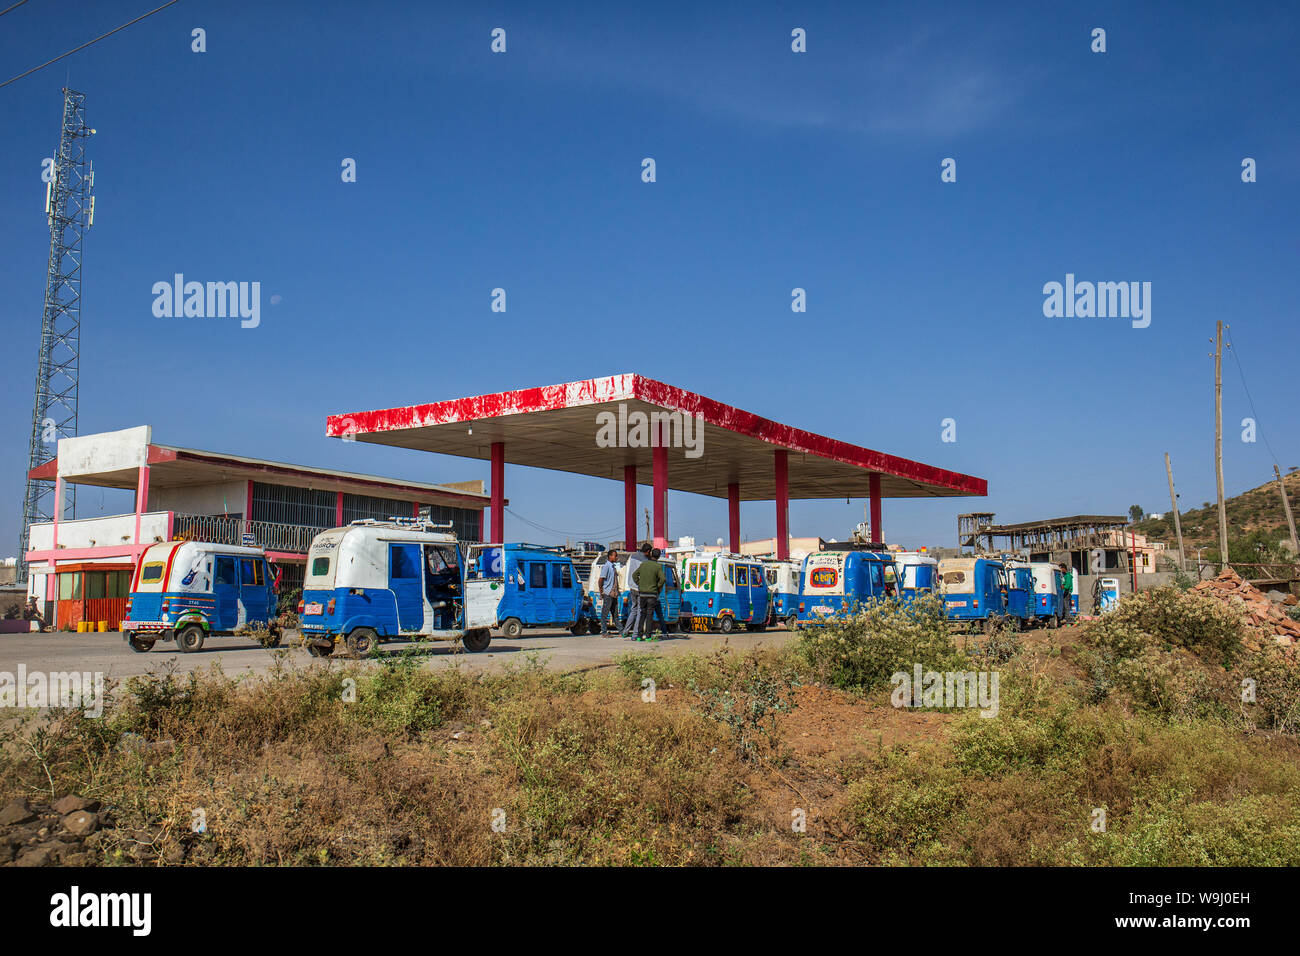 ETHIOPIA, MEKELLE, 01-12-2019. Bajaj waiting in line for fuel at a fuel station Stock Photo